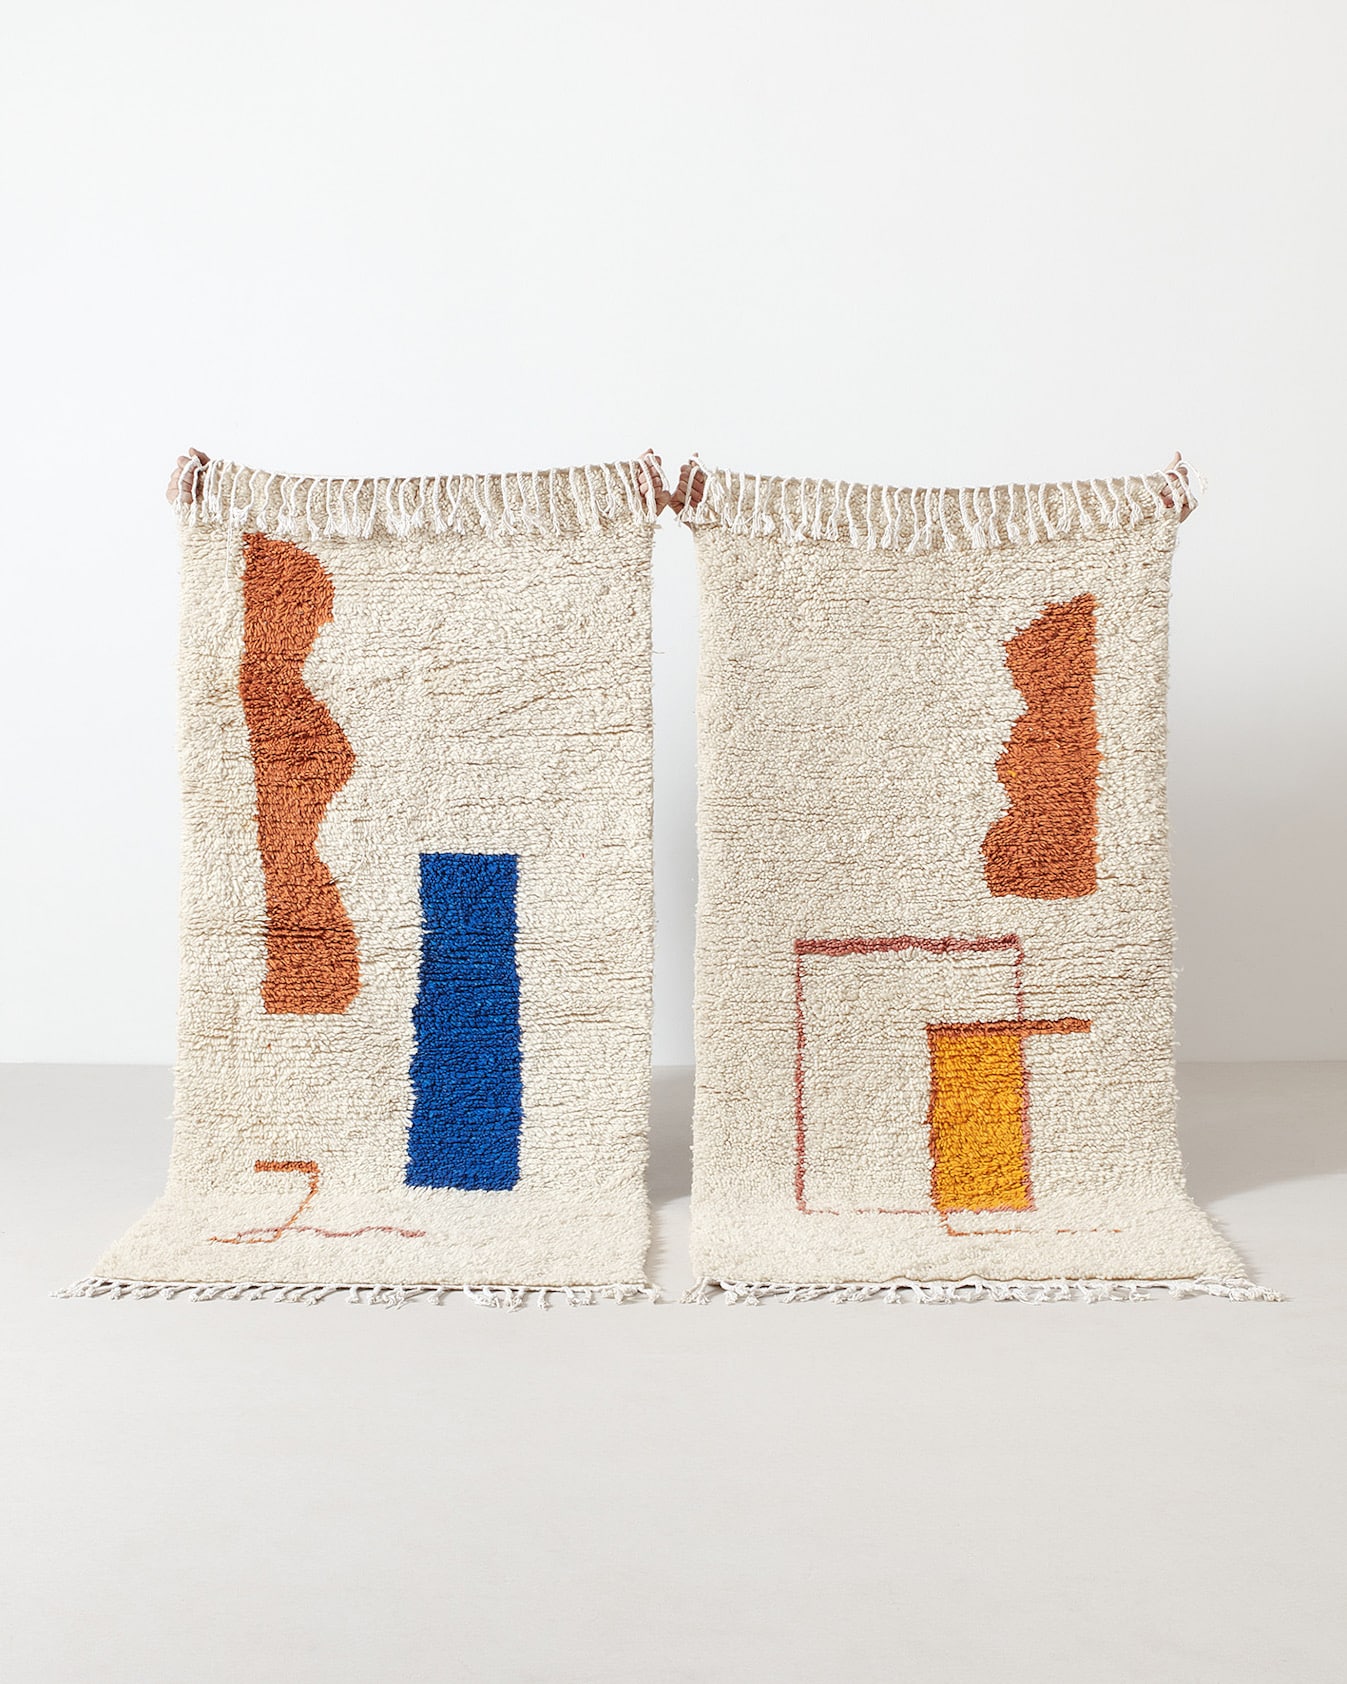 Berber rug with cinnamon and royal blue shapes and Berber rug with cinnamon and ochre shapes